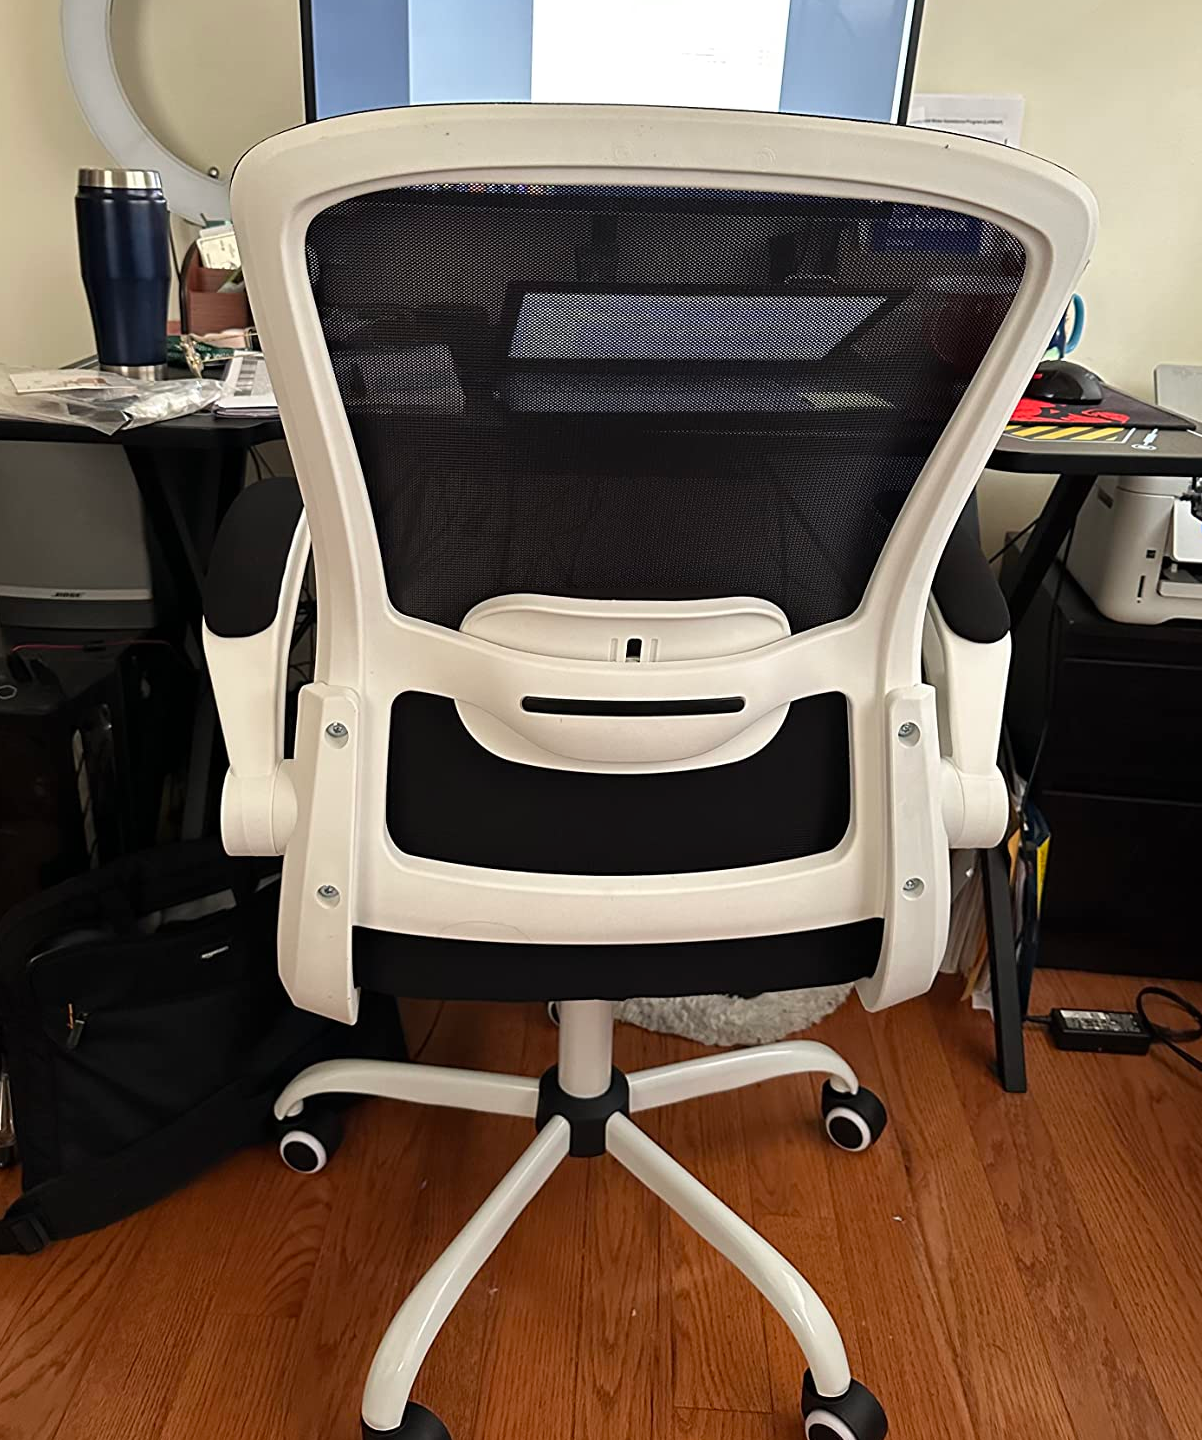 Blarity Office Chair, High Back Ergonomic Desk Chair with